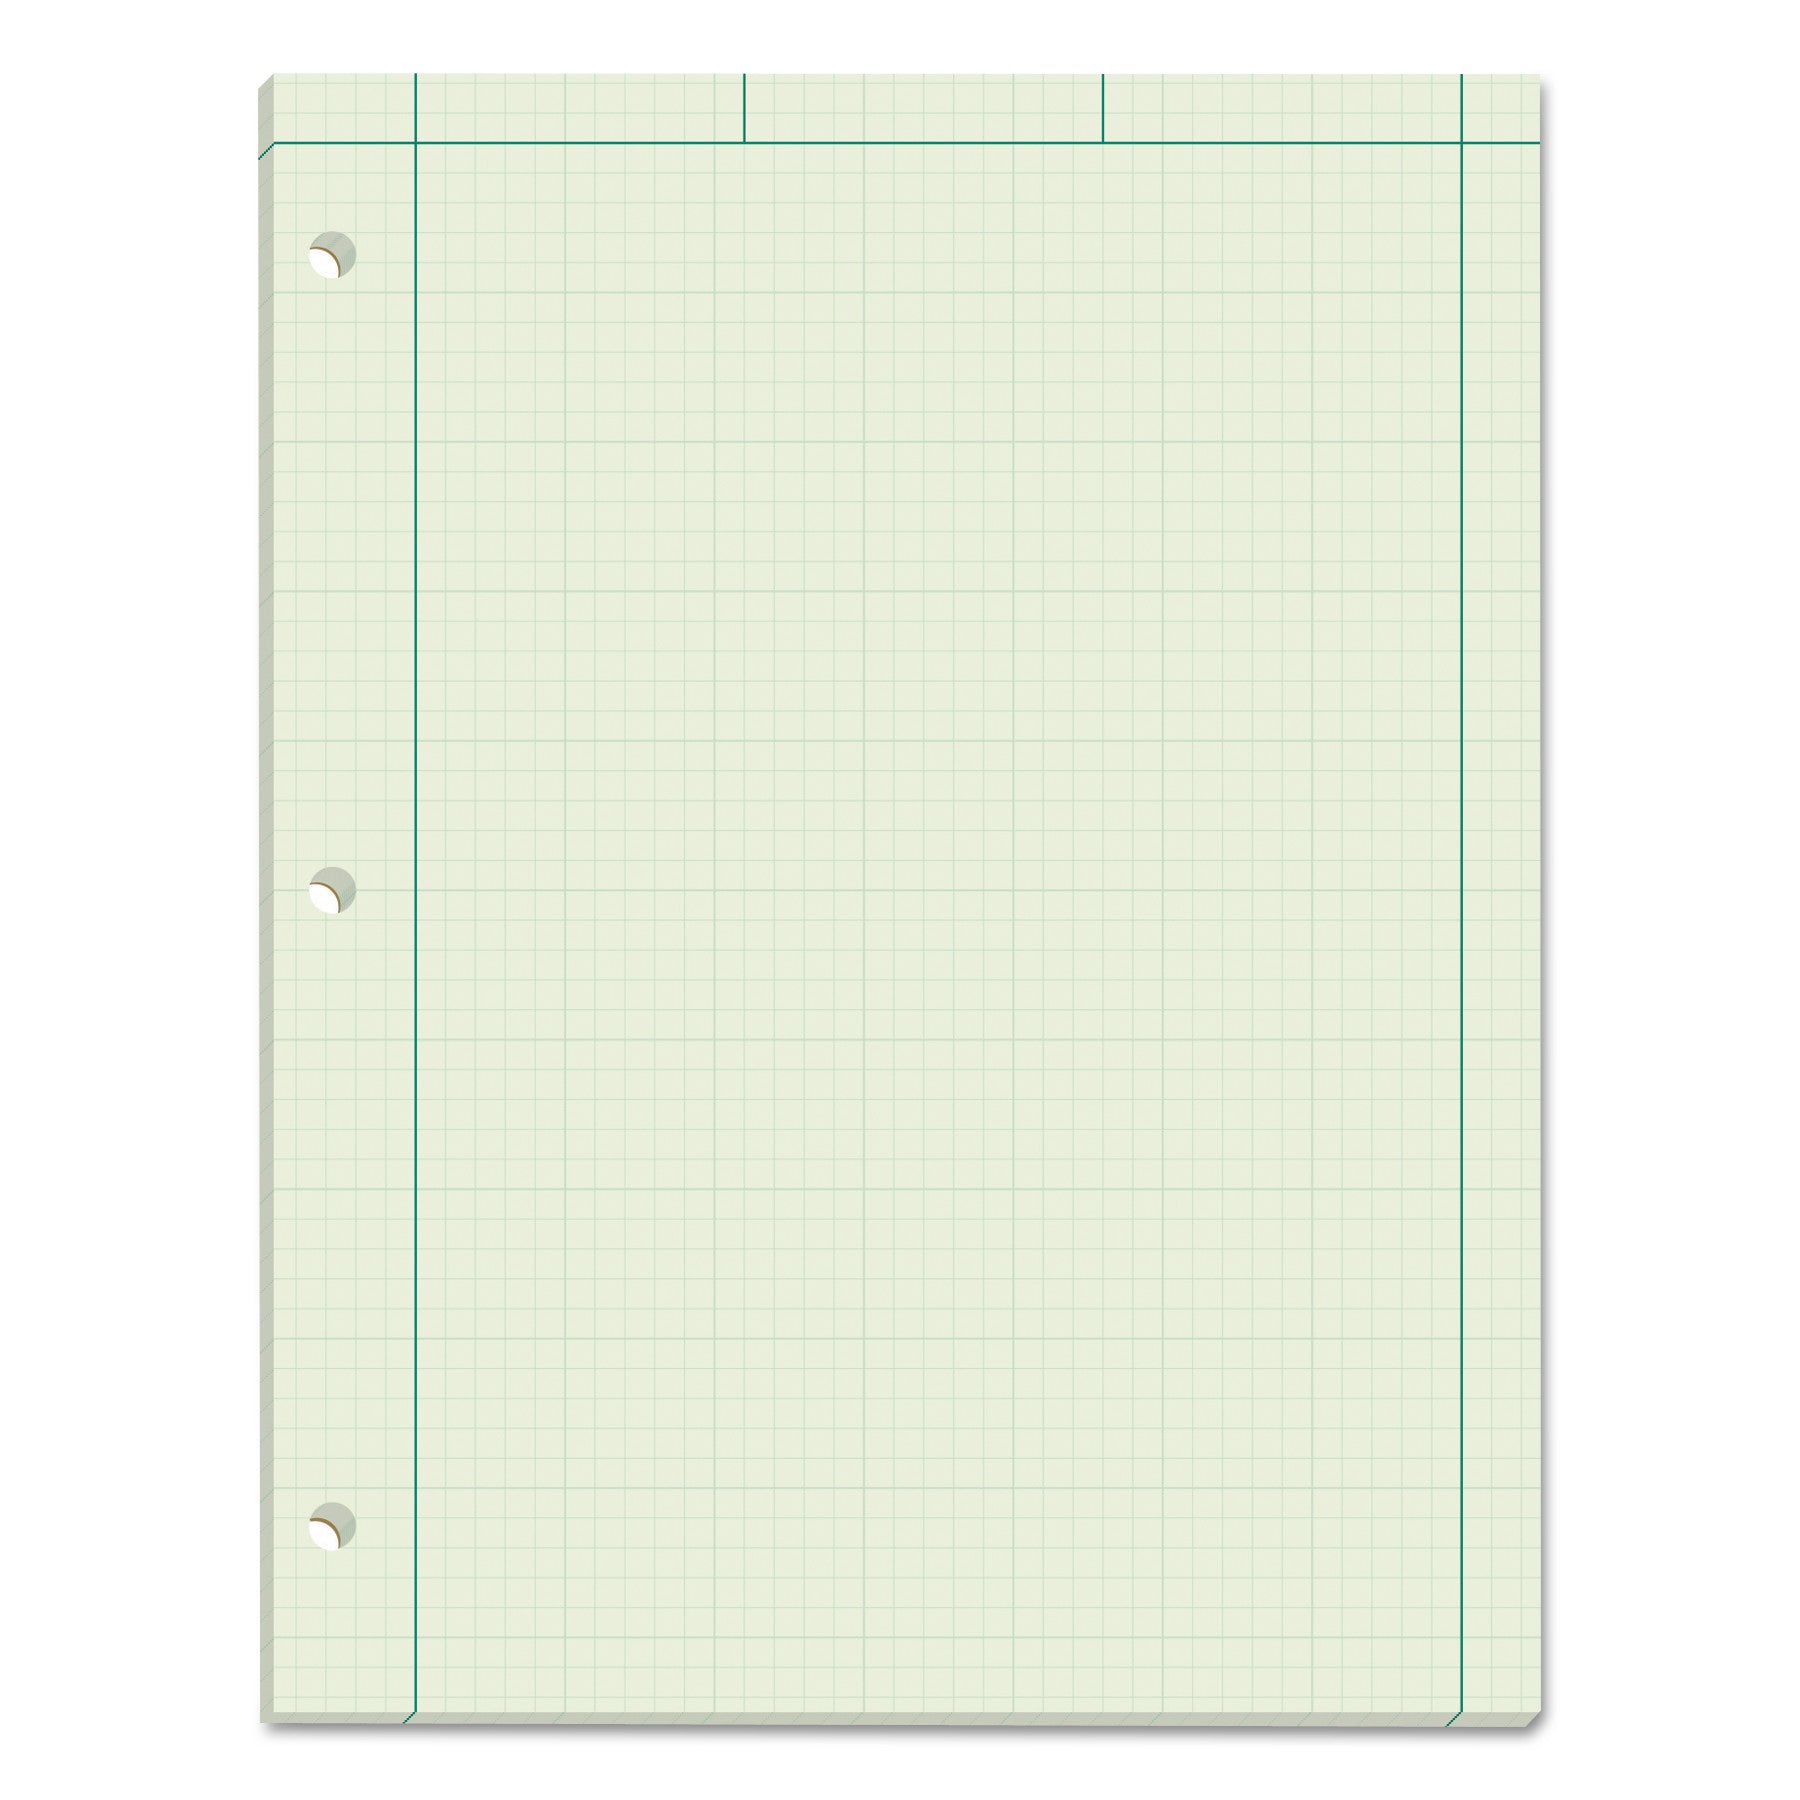 Engineering Computation Pads, Cross-Section Quad Rule (5 sq/in, 1 sq/in), Black/Green Cover, 100 Green-Tint 8.5 x 11 Sheets - 